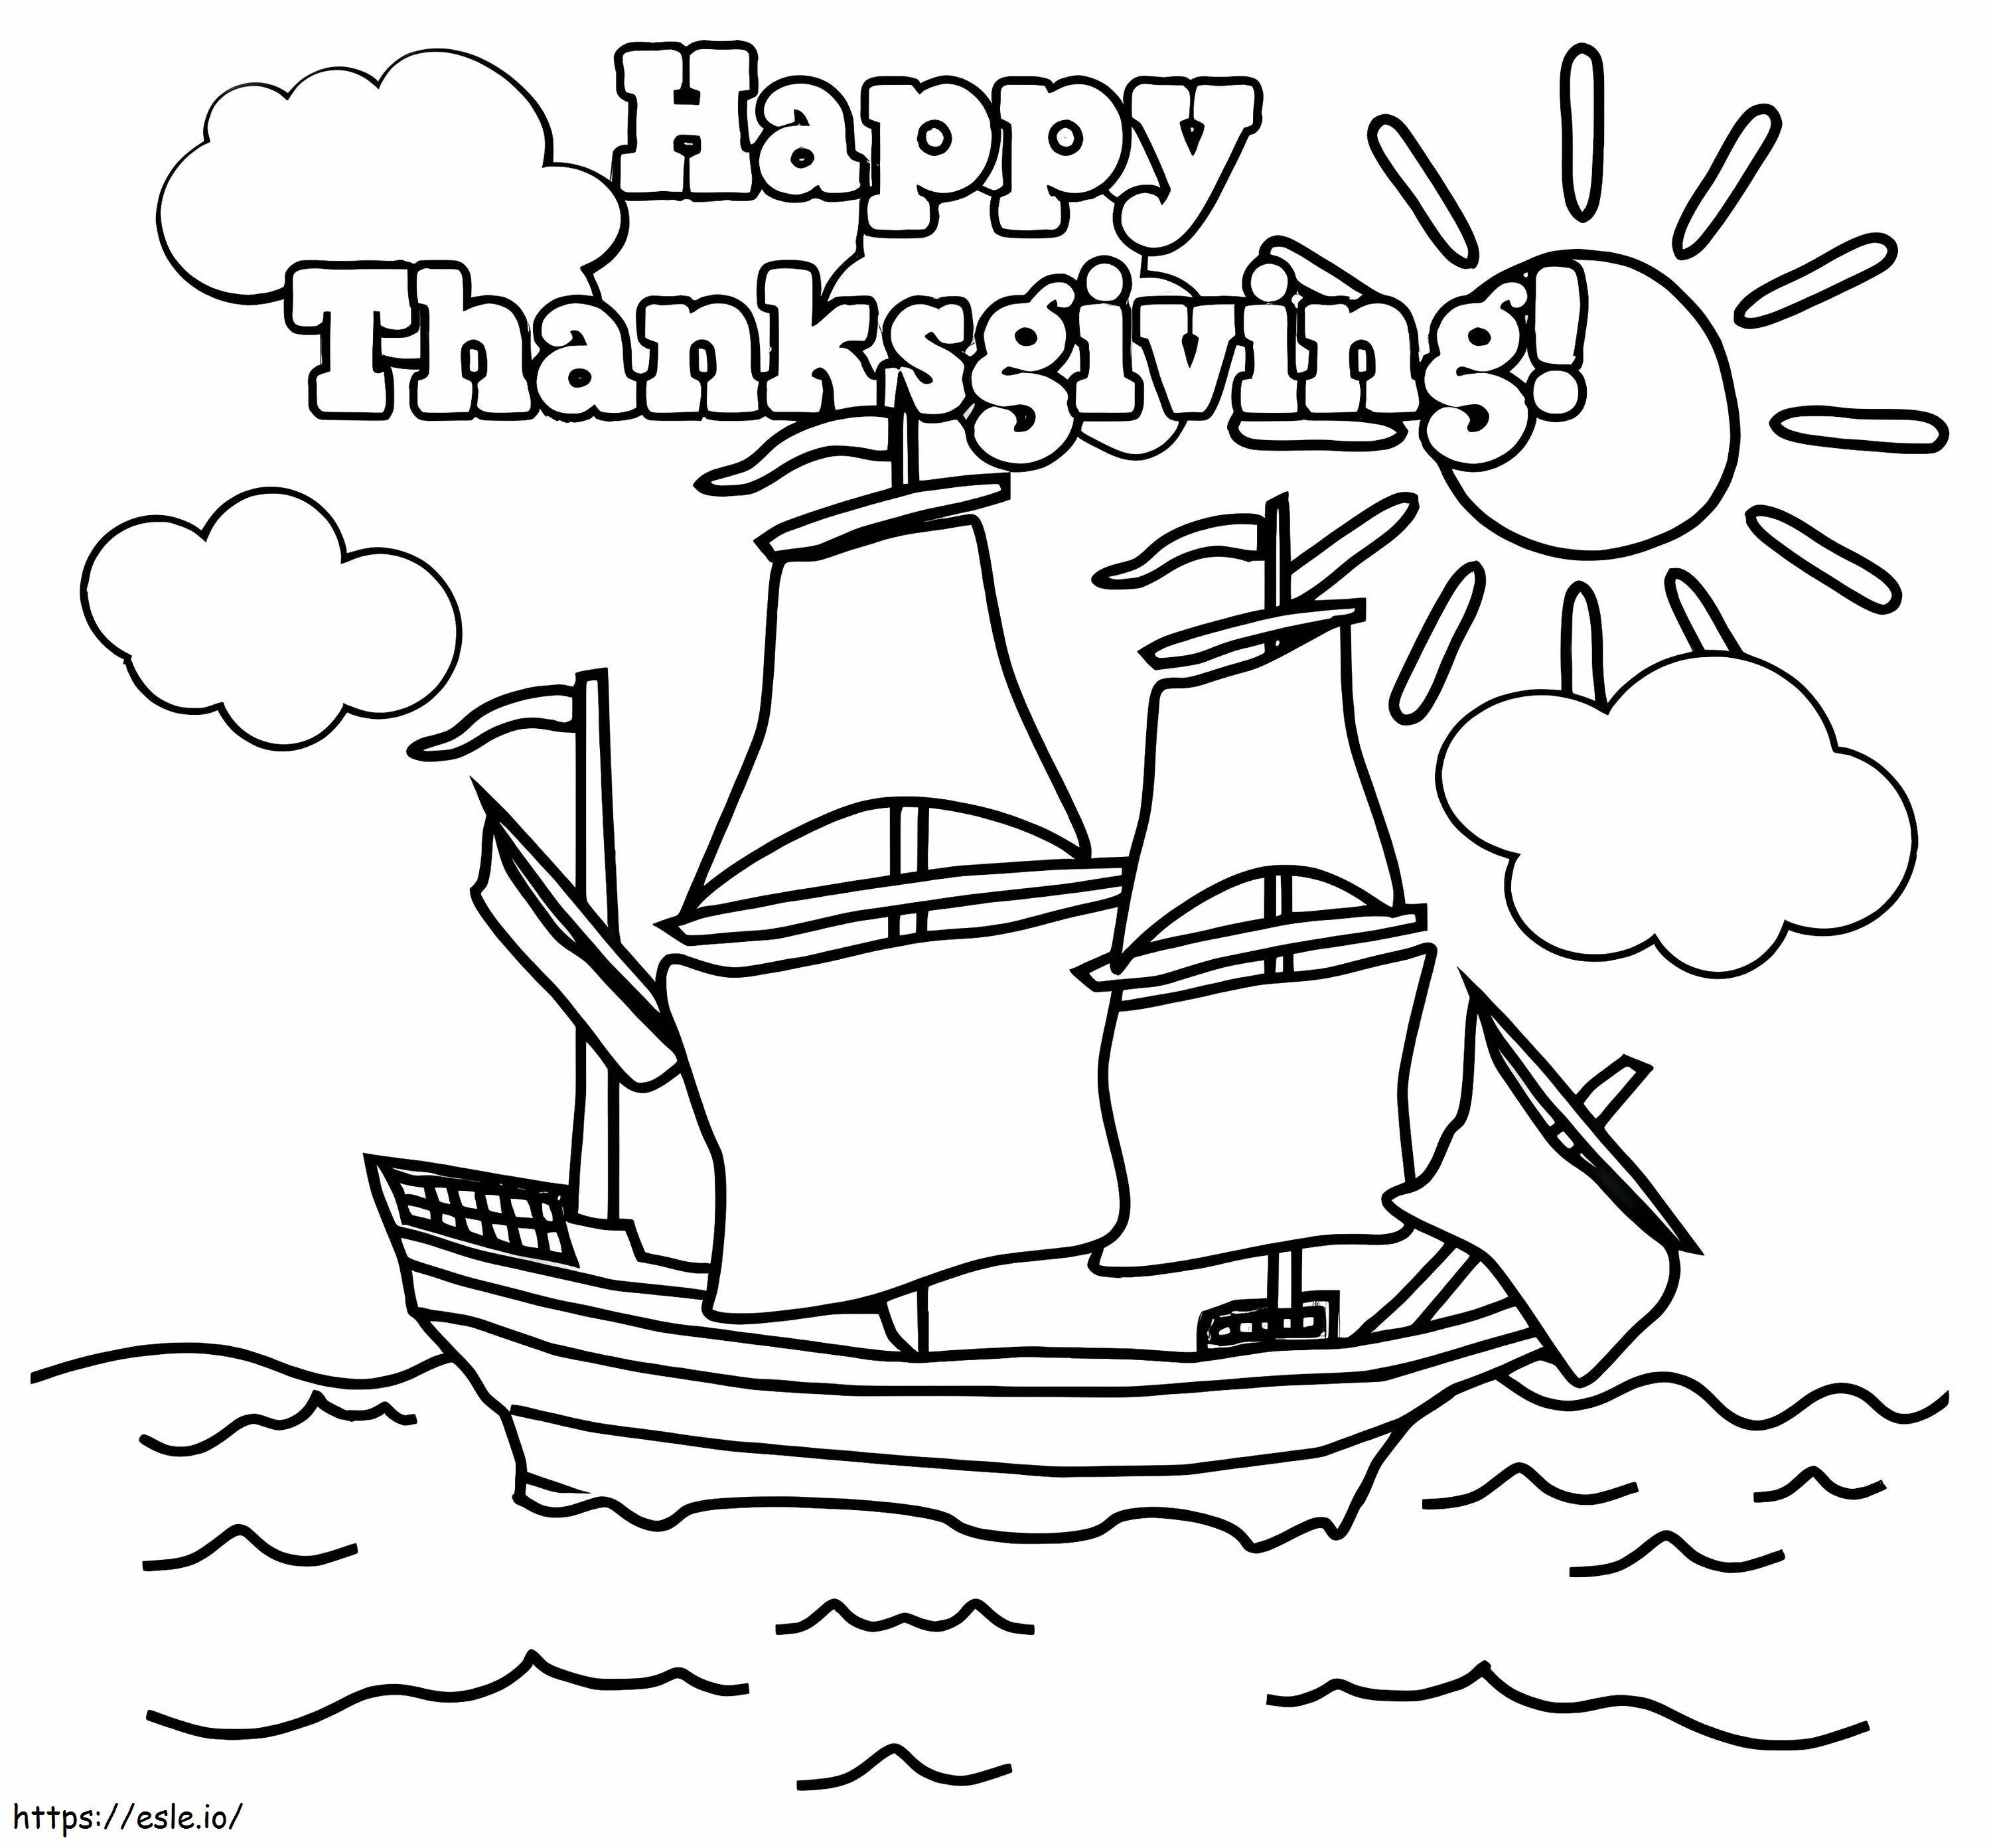 Thanksgiving Mayflower coloring page